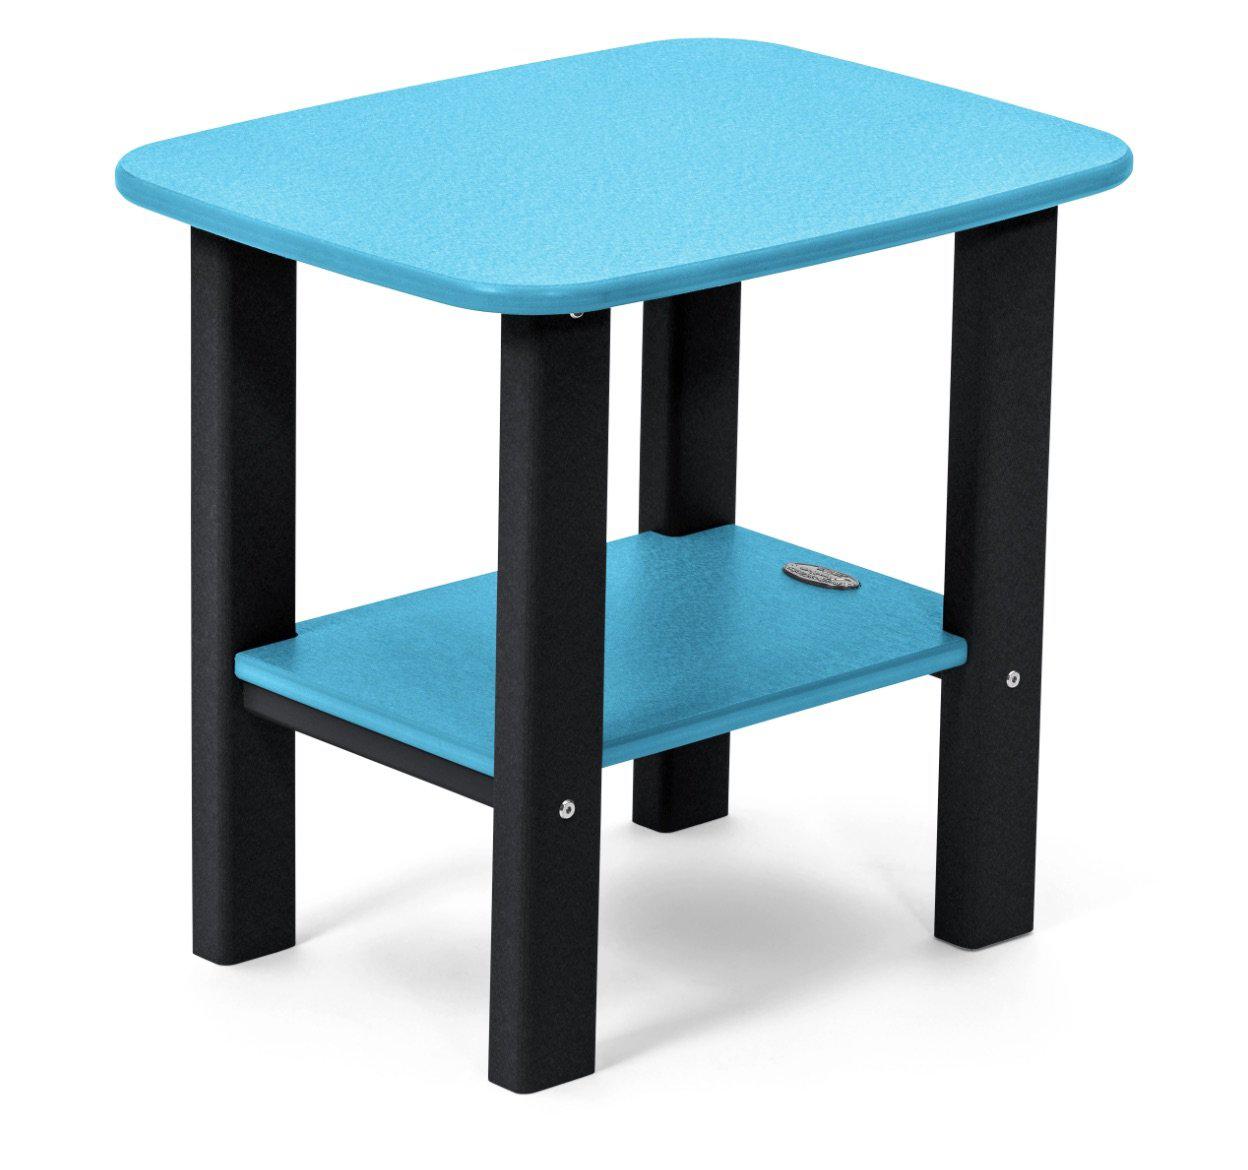 Perfect Choice Furniture Recycled Plastic Side Table - LEAD TIME TO SHIP 4 WEEKS OR LESS